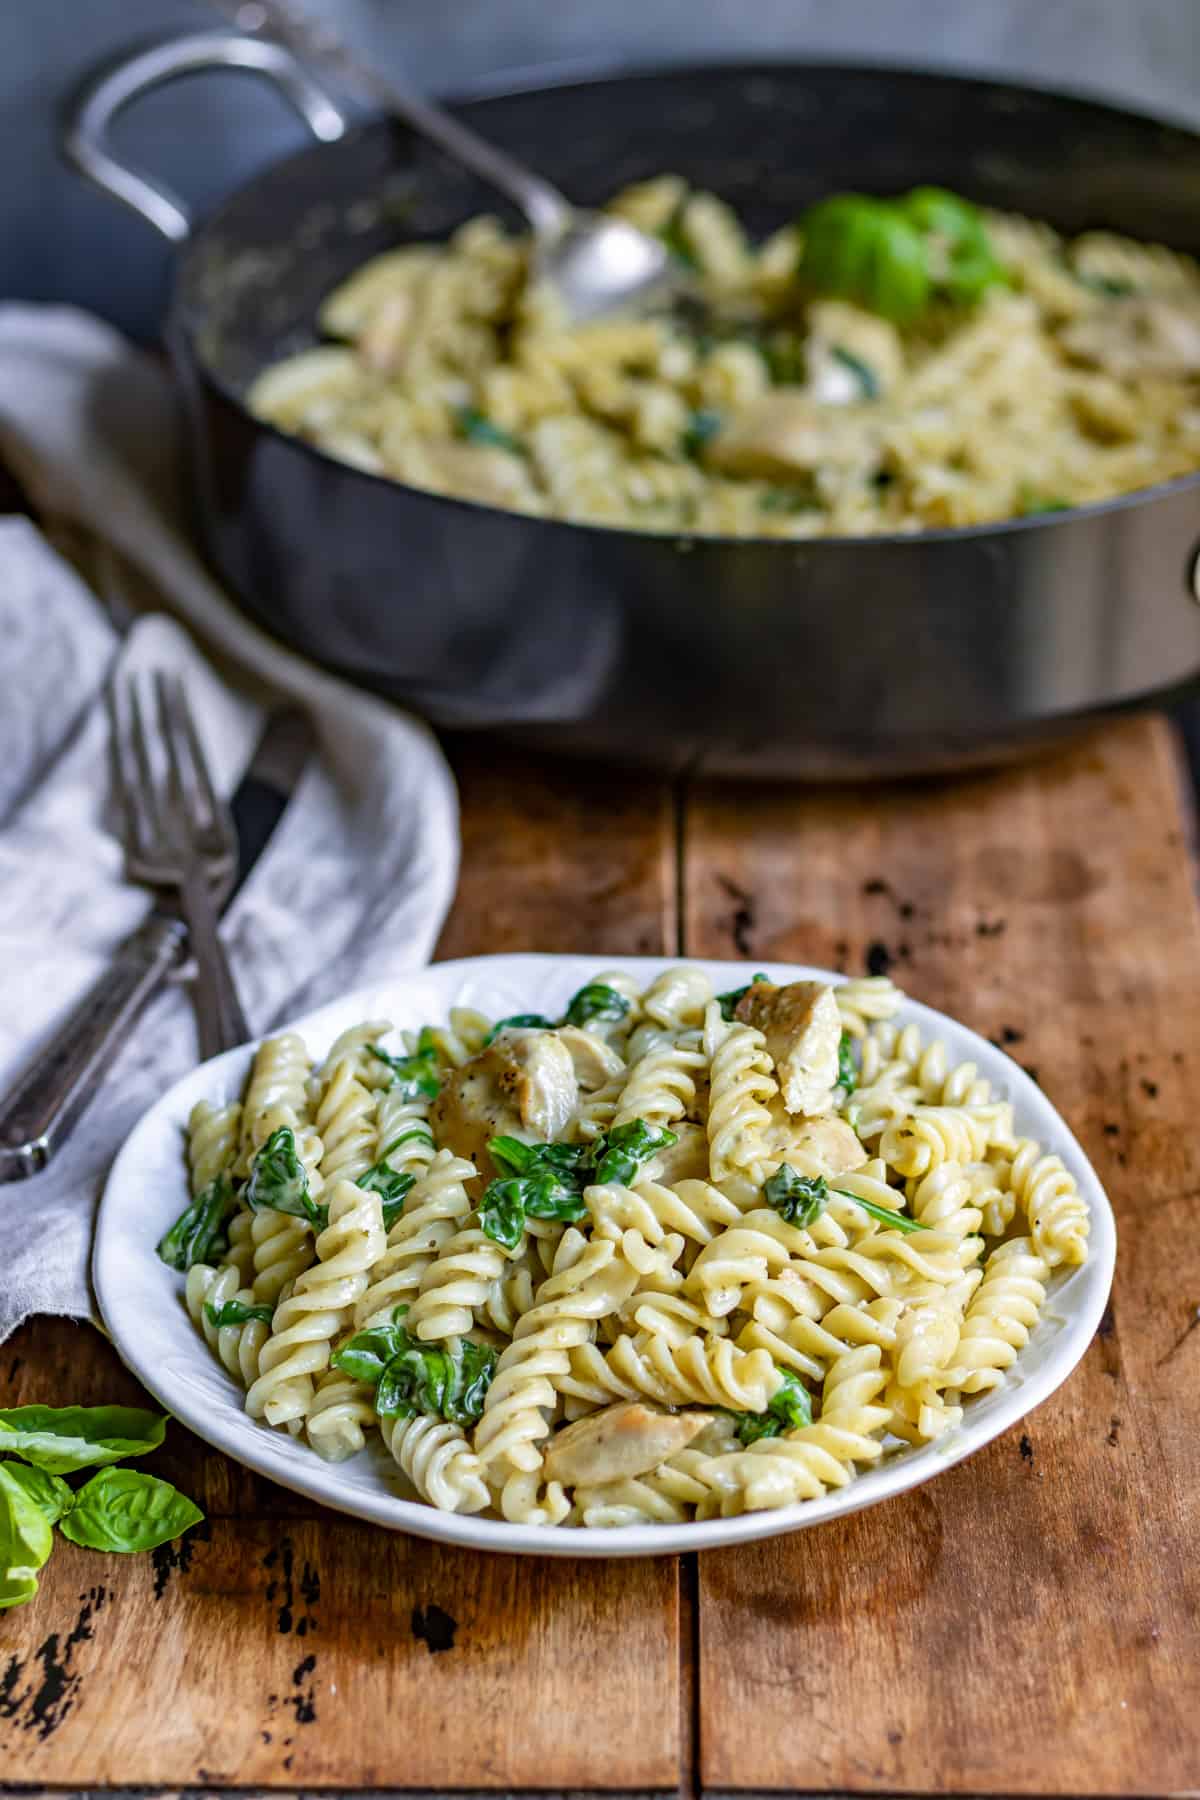 Plate of chicken pesto pasta on a table.